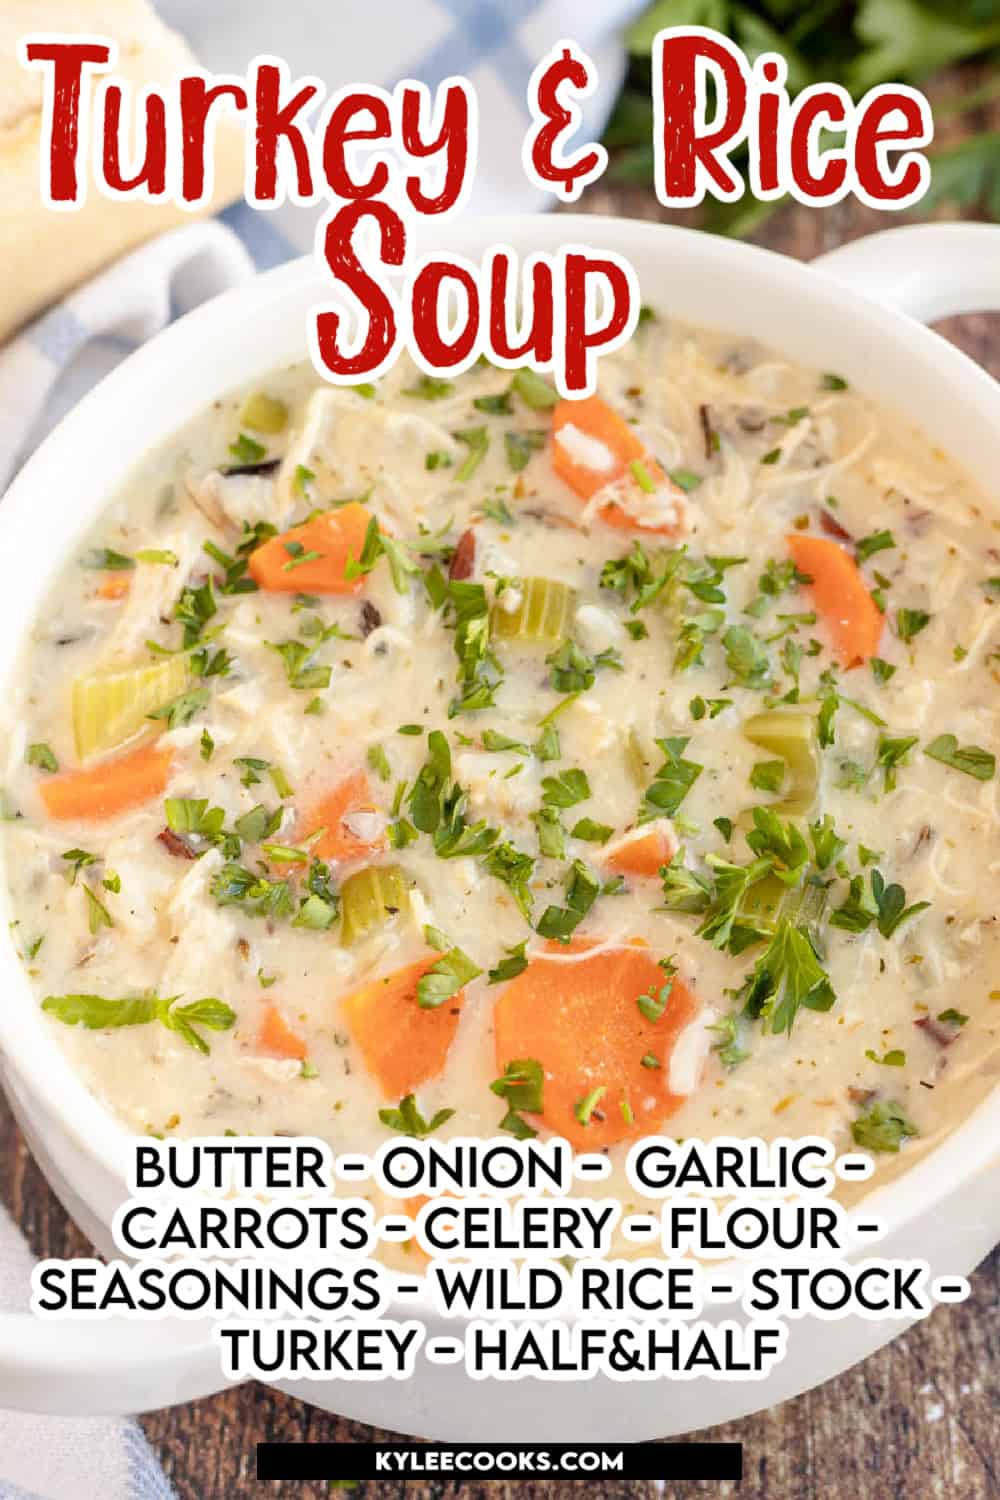 turkey rice soup in a white bowl, with recipe name and ingredients overlaid in text.